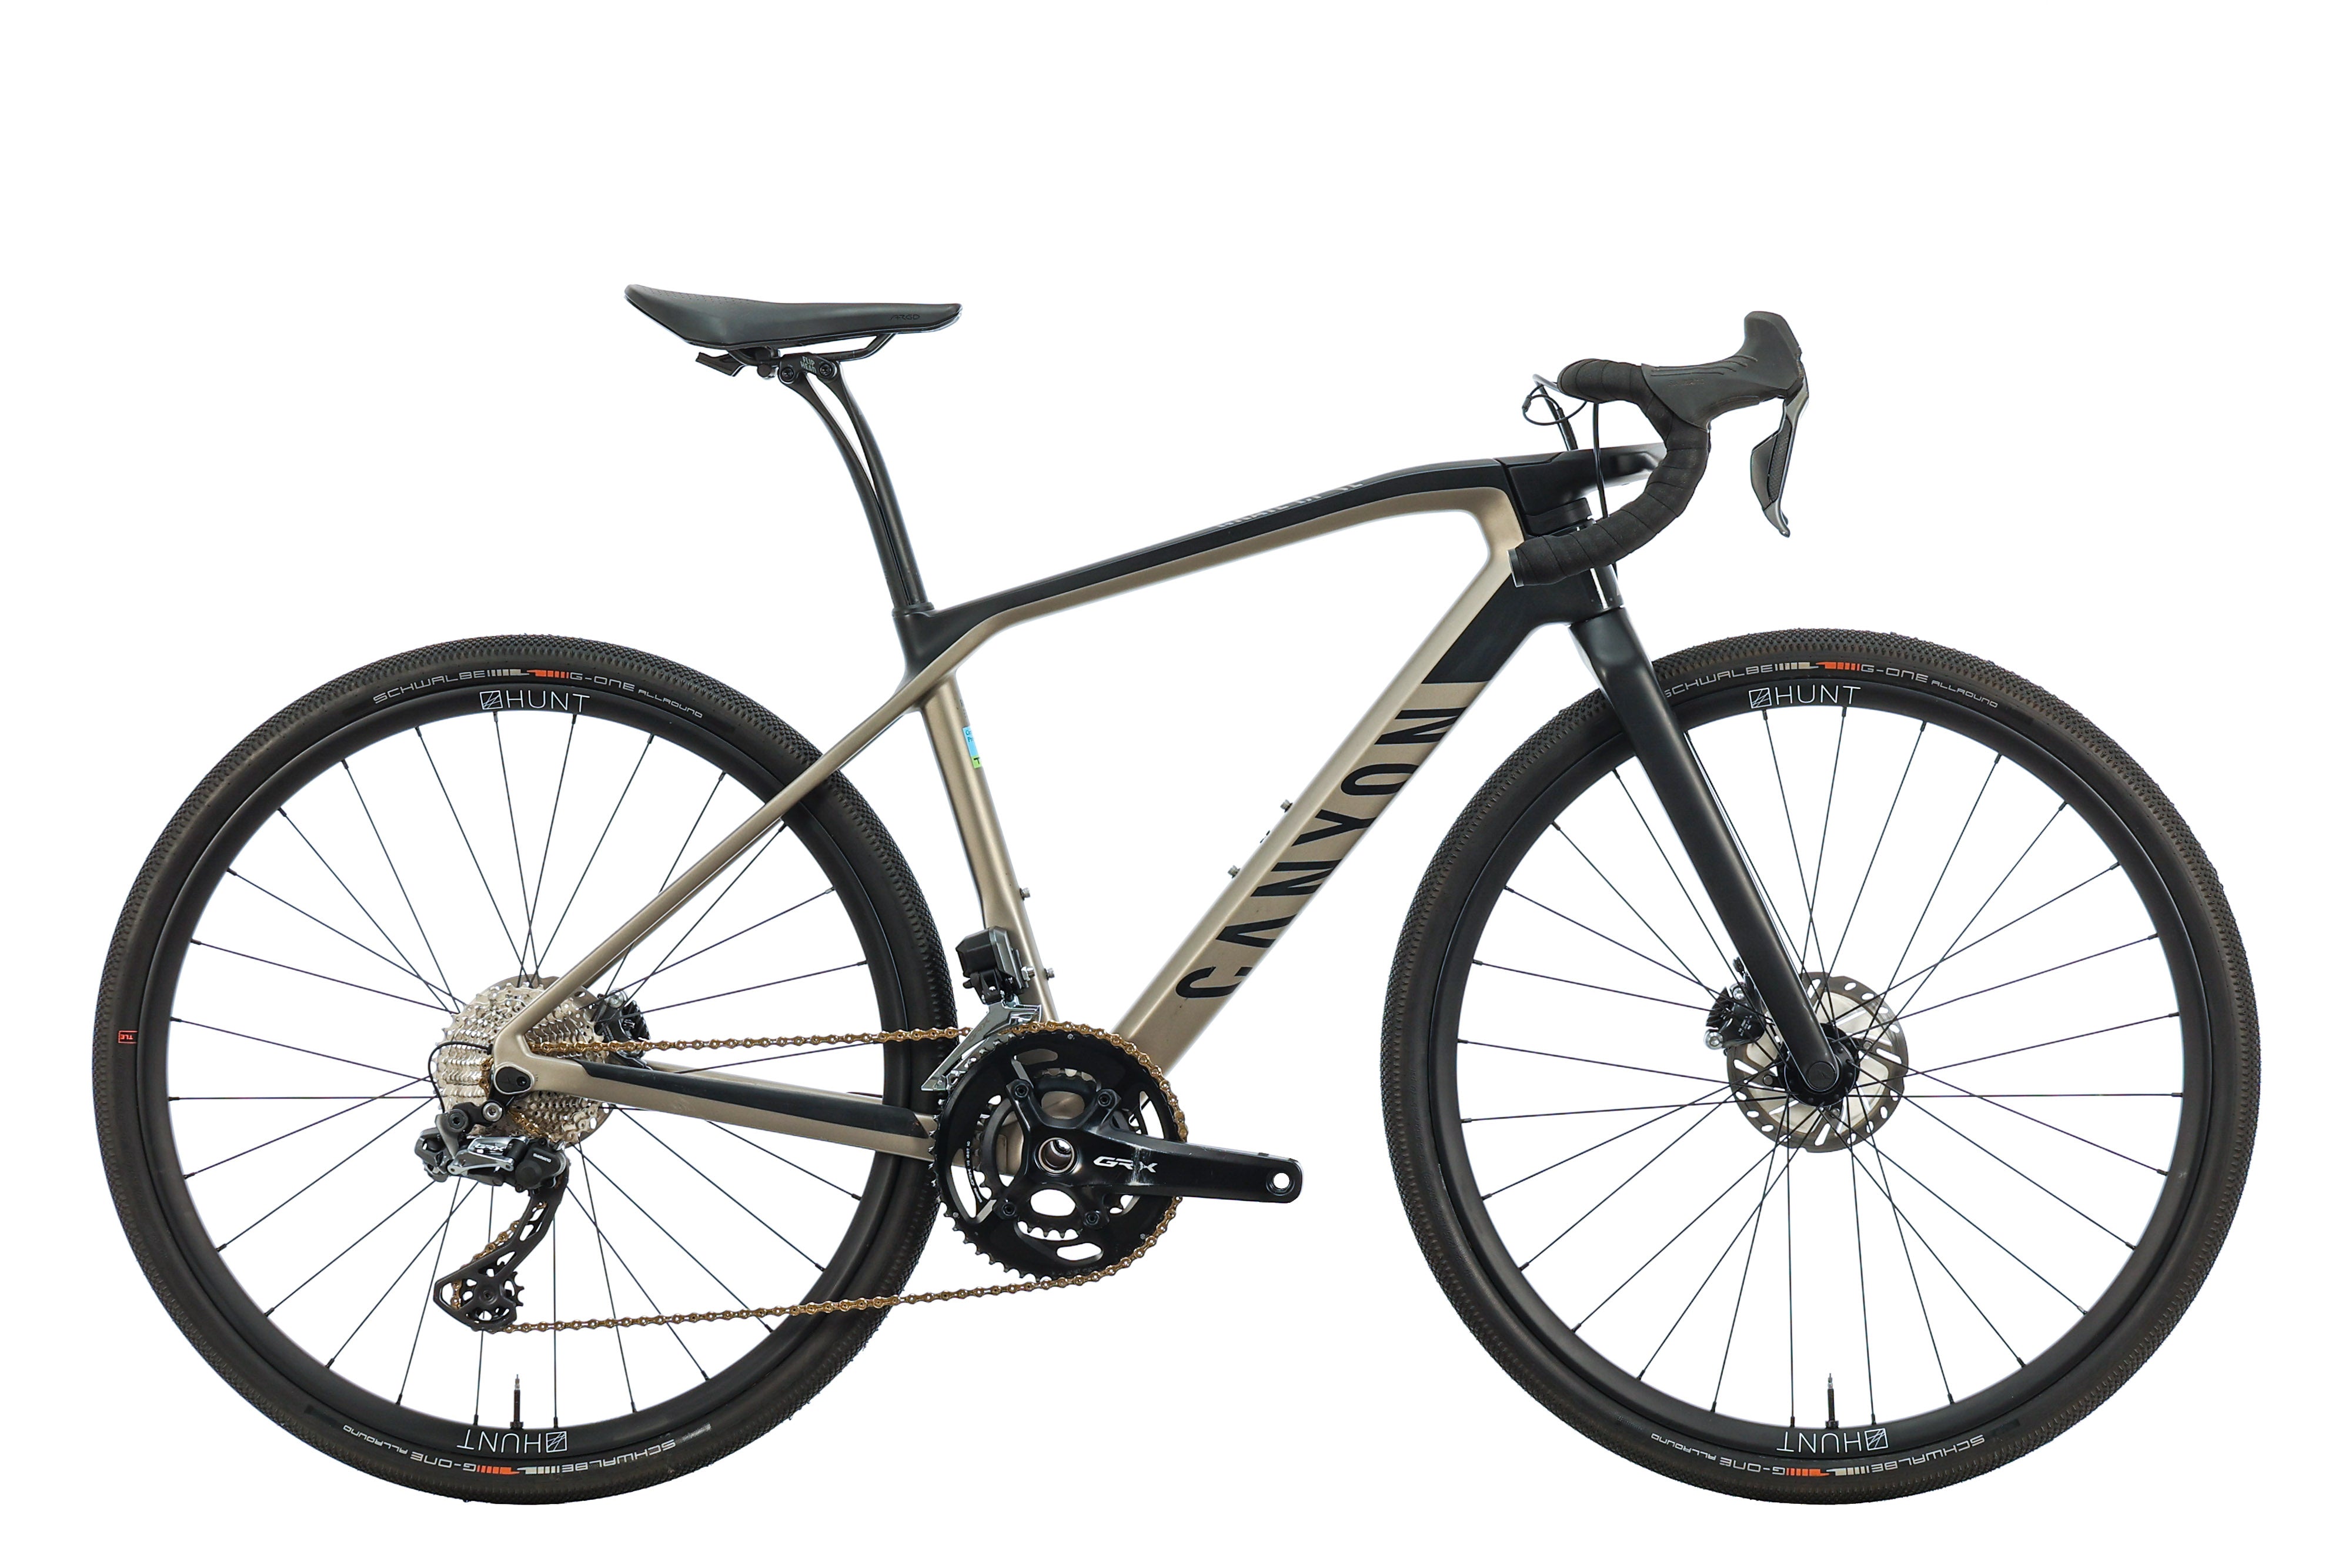 Canyon Gravel Bikes For Sale